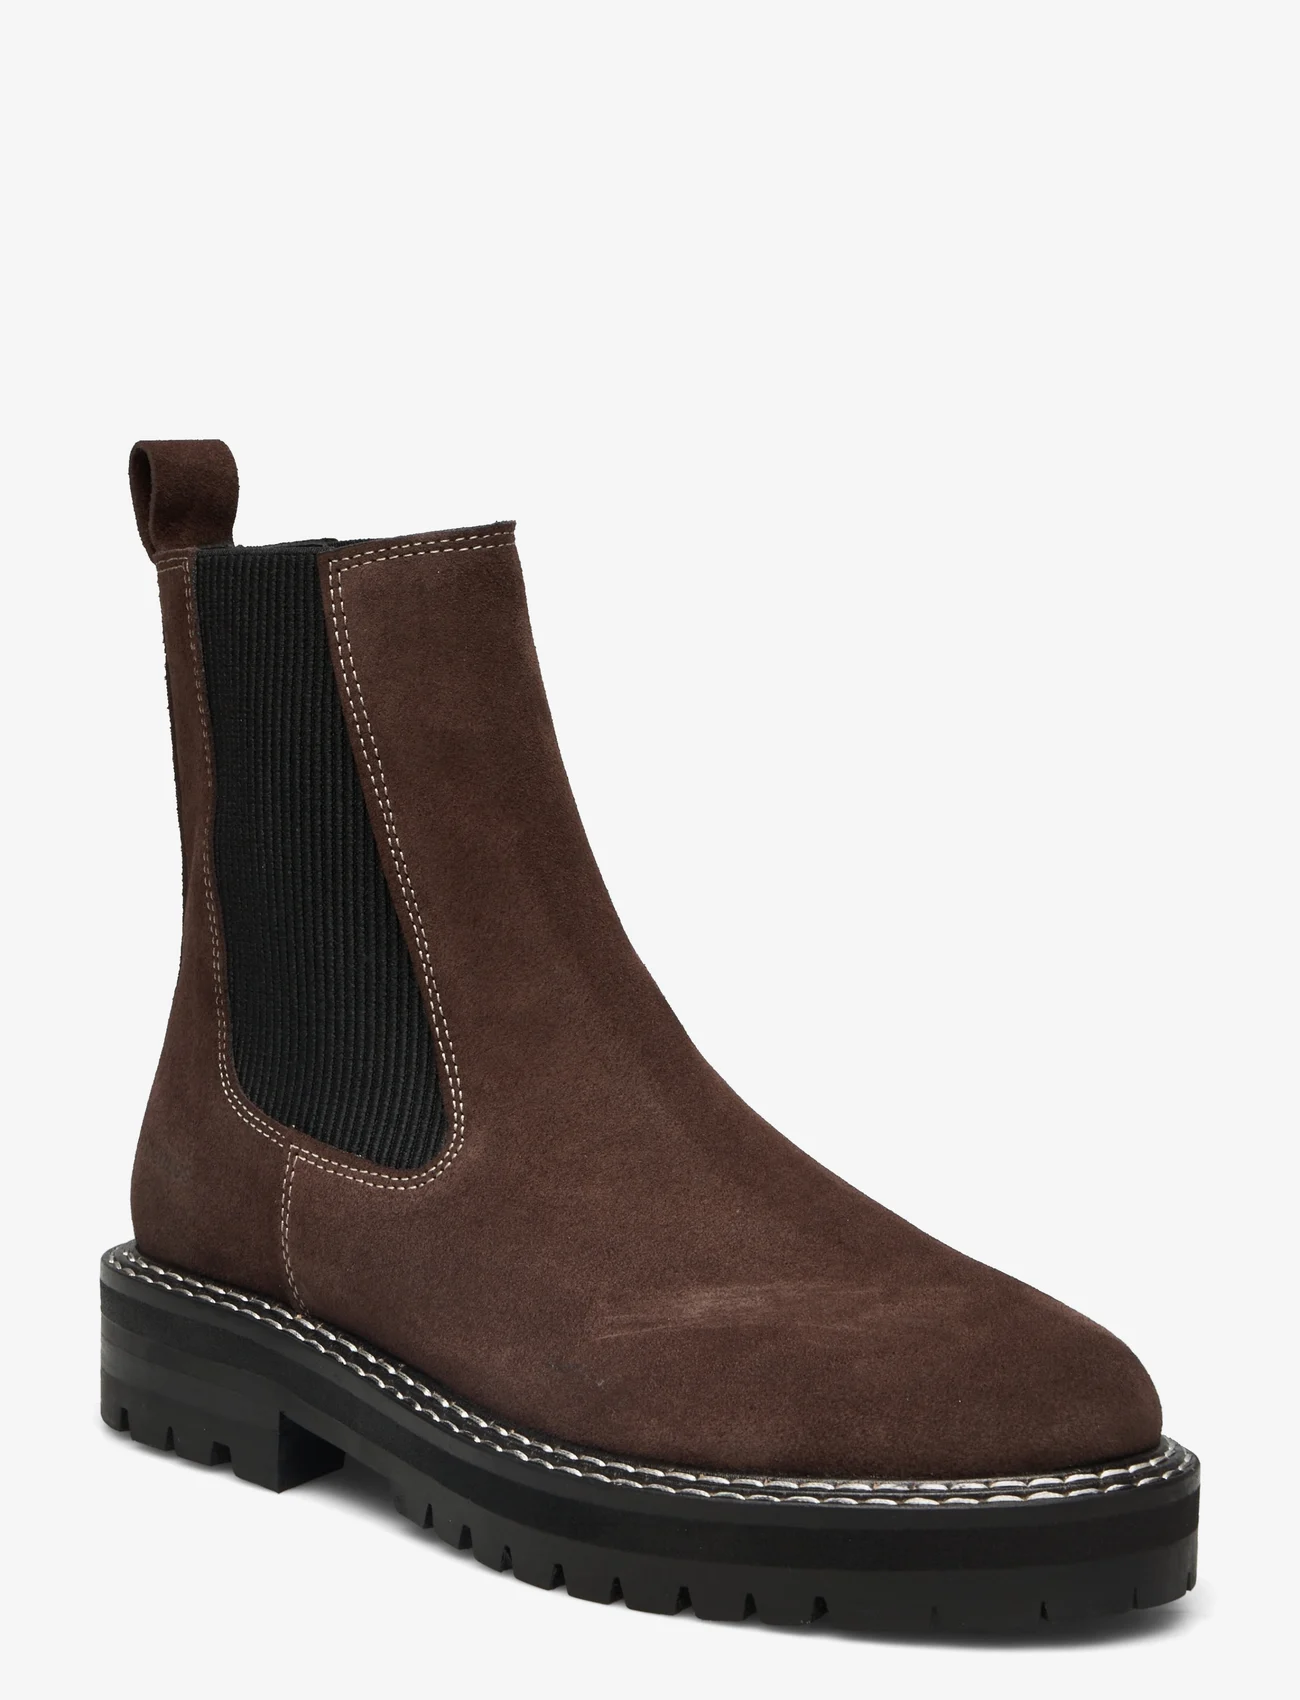 ANGULUS - Boots - flat - chelsea boots - 1718/019 brown/black - 0